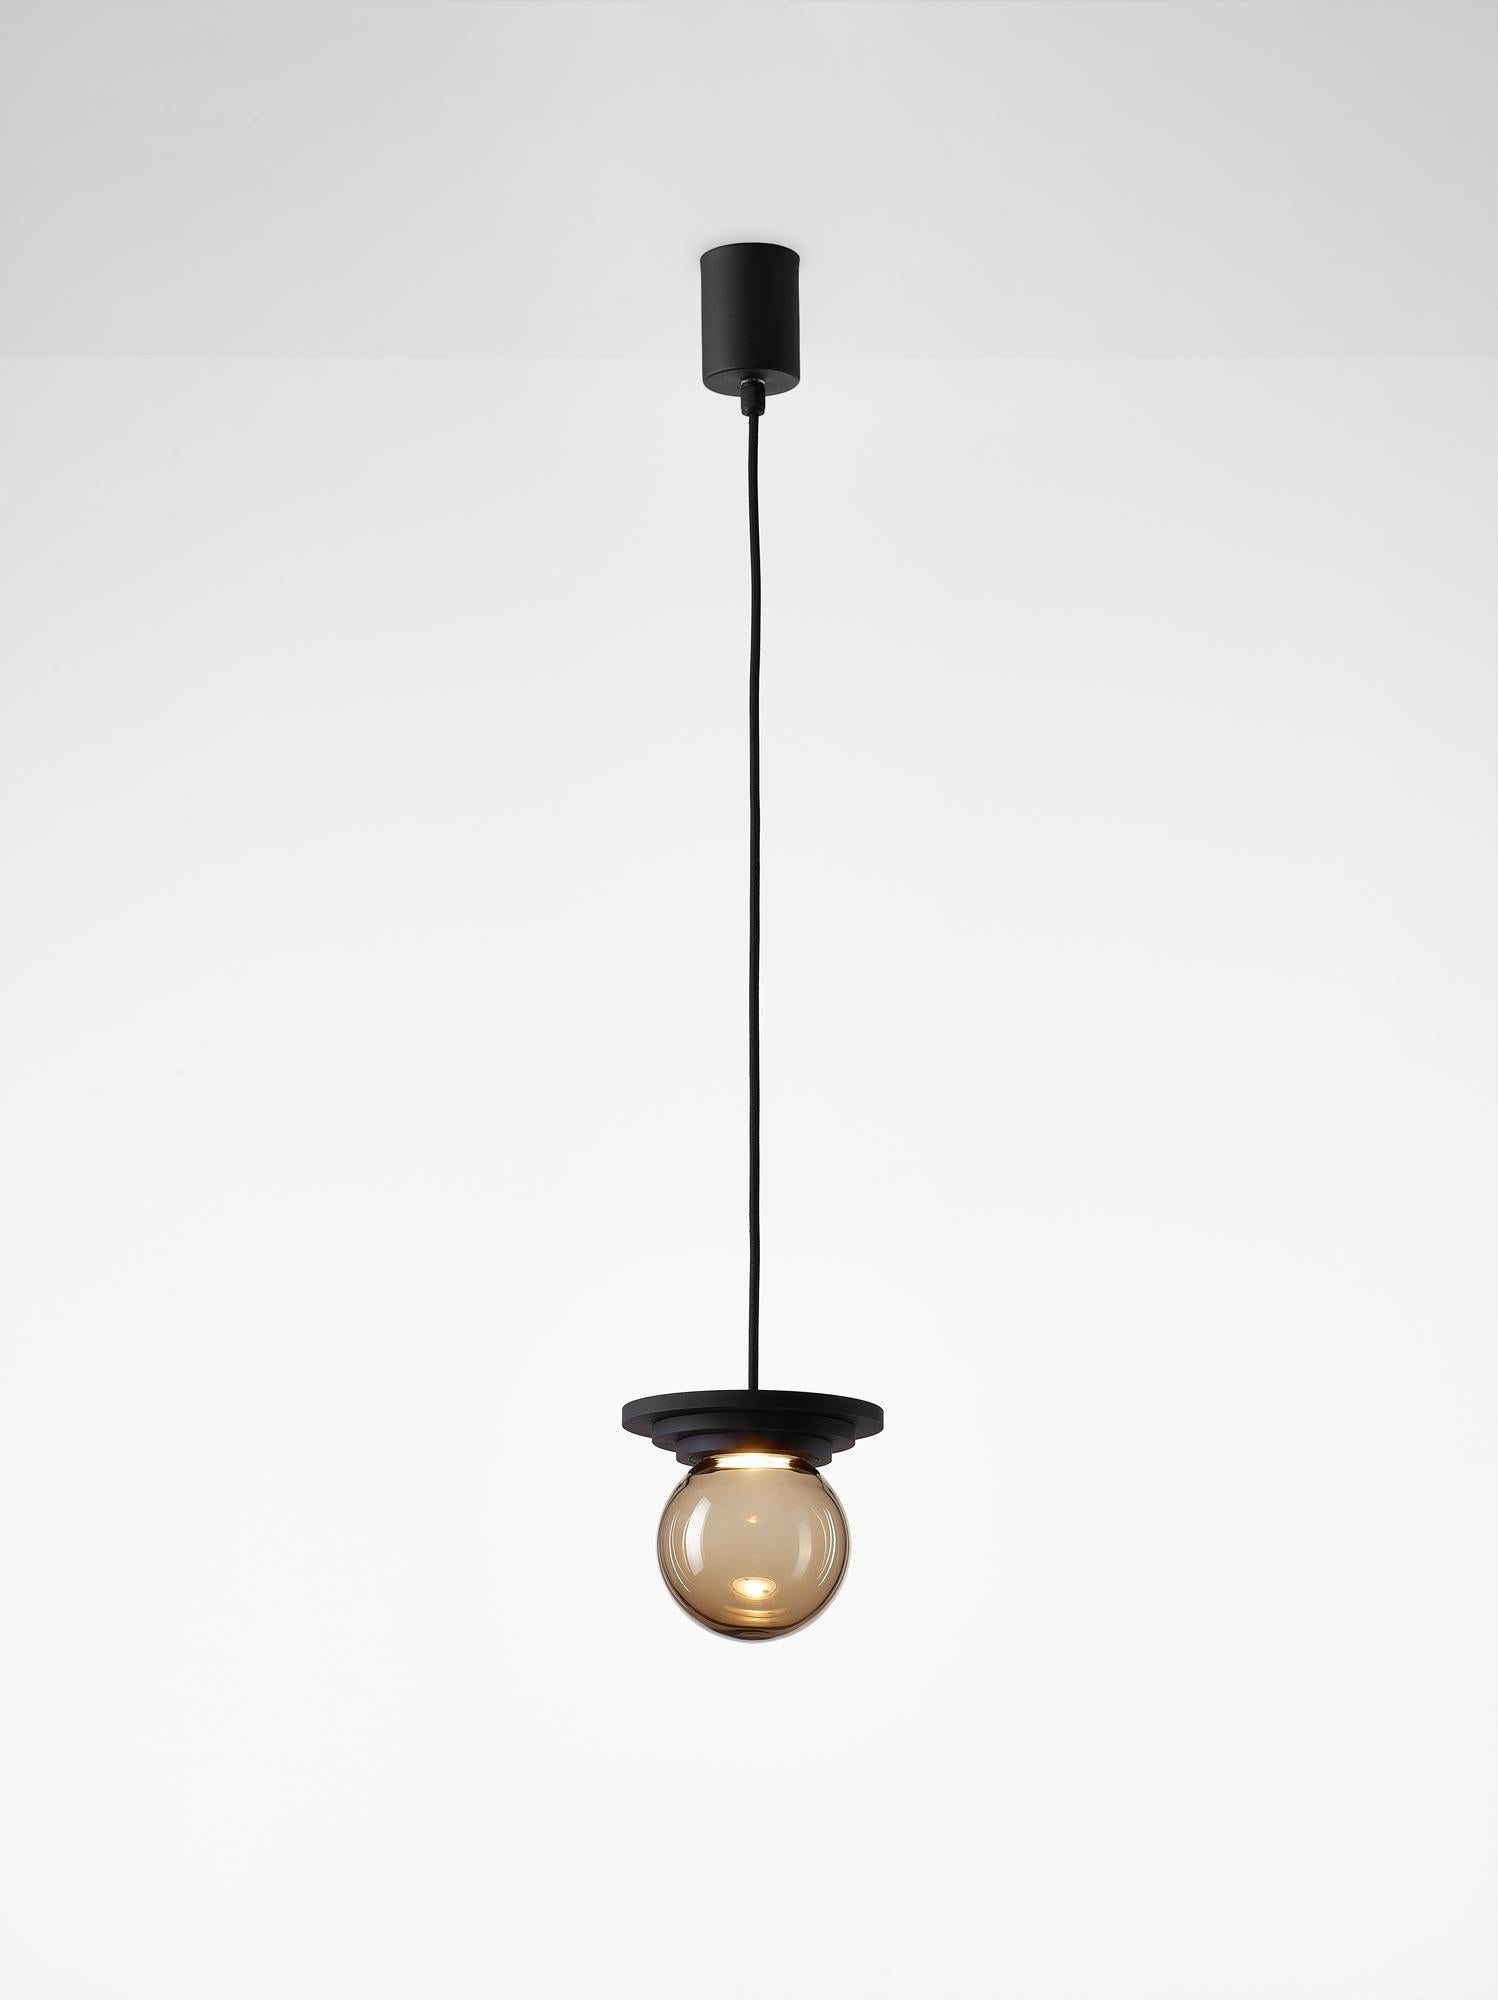 Black Stratos mini ball pendant light by Dechem Studio.
Dimensions: D 12 x H 14 cm.
Materials: aluminum, glass.
Also available: different colours available.

Different shapes of capsules and spheres contrast with anodized alloy fixtures,